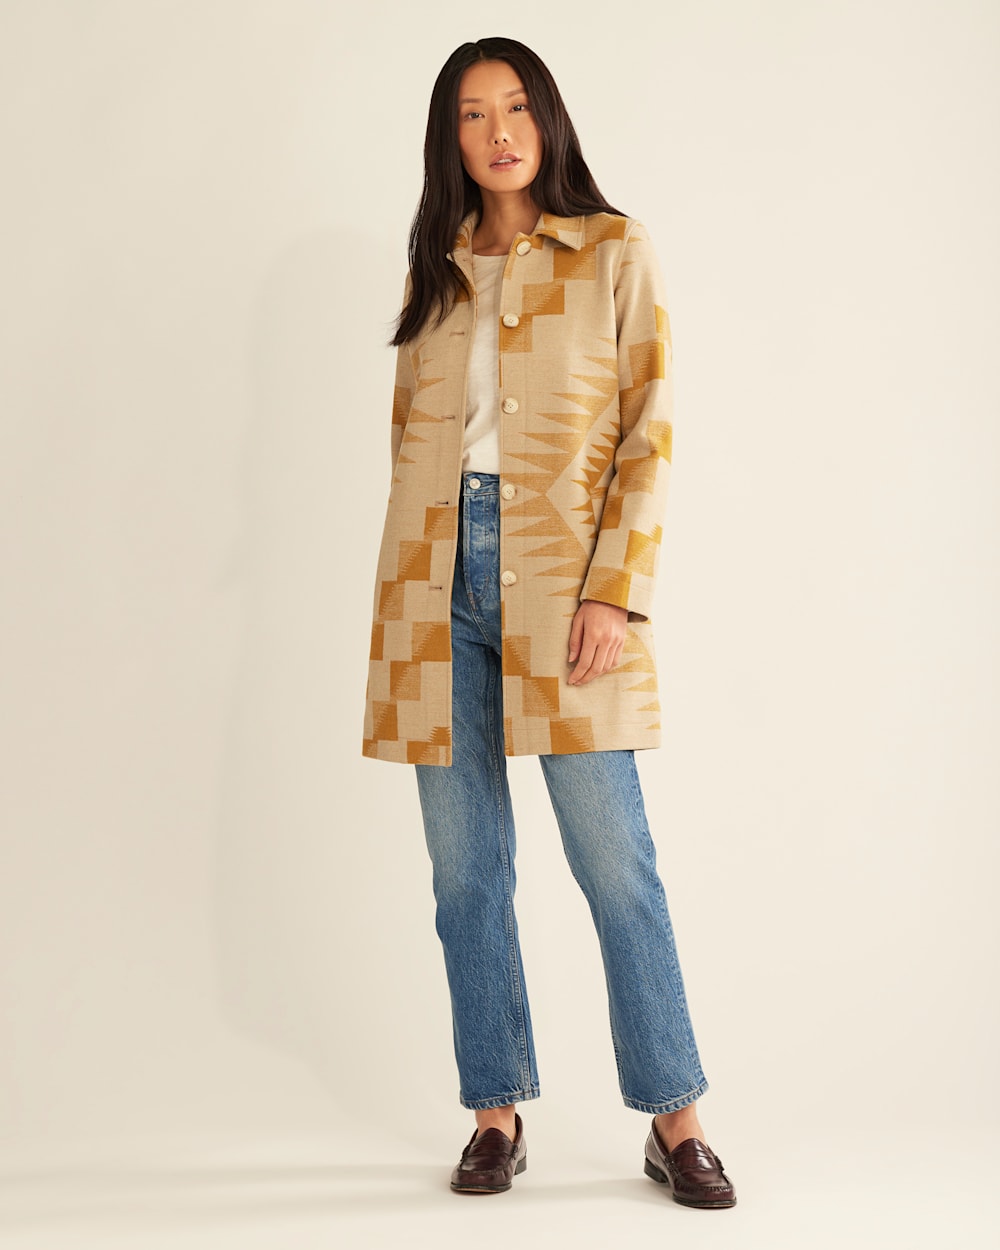 WOMEN'S CLUB COLLAR WOOL JACKET IN GOLD ABIQUIU SKY image number 1